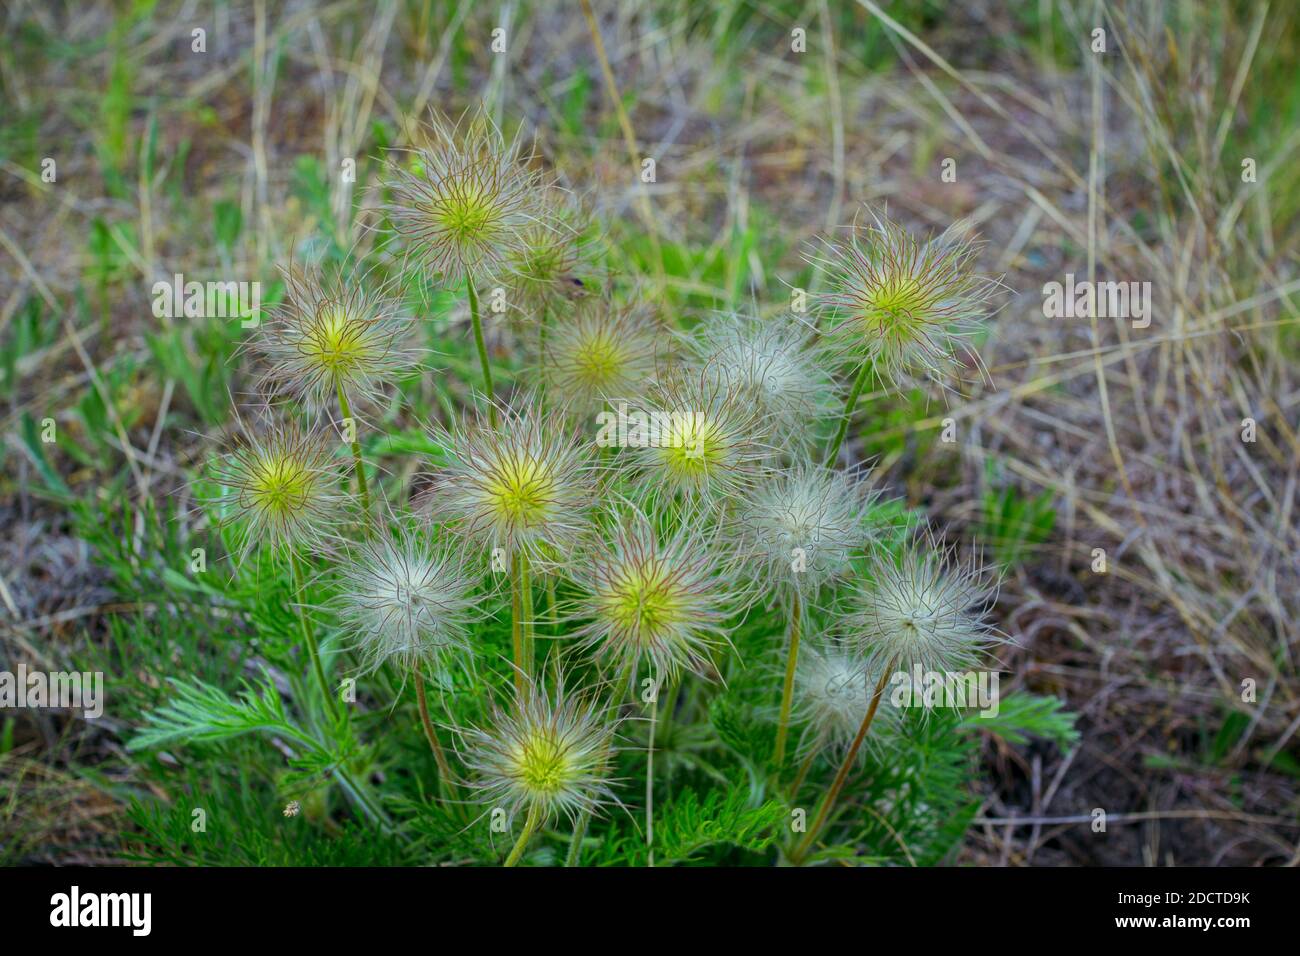 Alpine anemone fruits. Pulsatilla alpine plant, growing on the meadow. Spring nature. Stock Photo